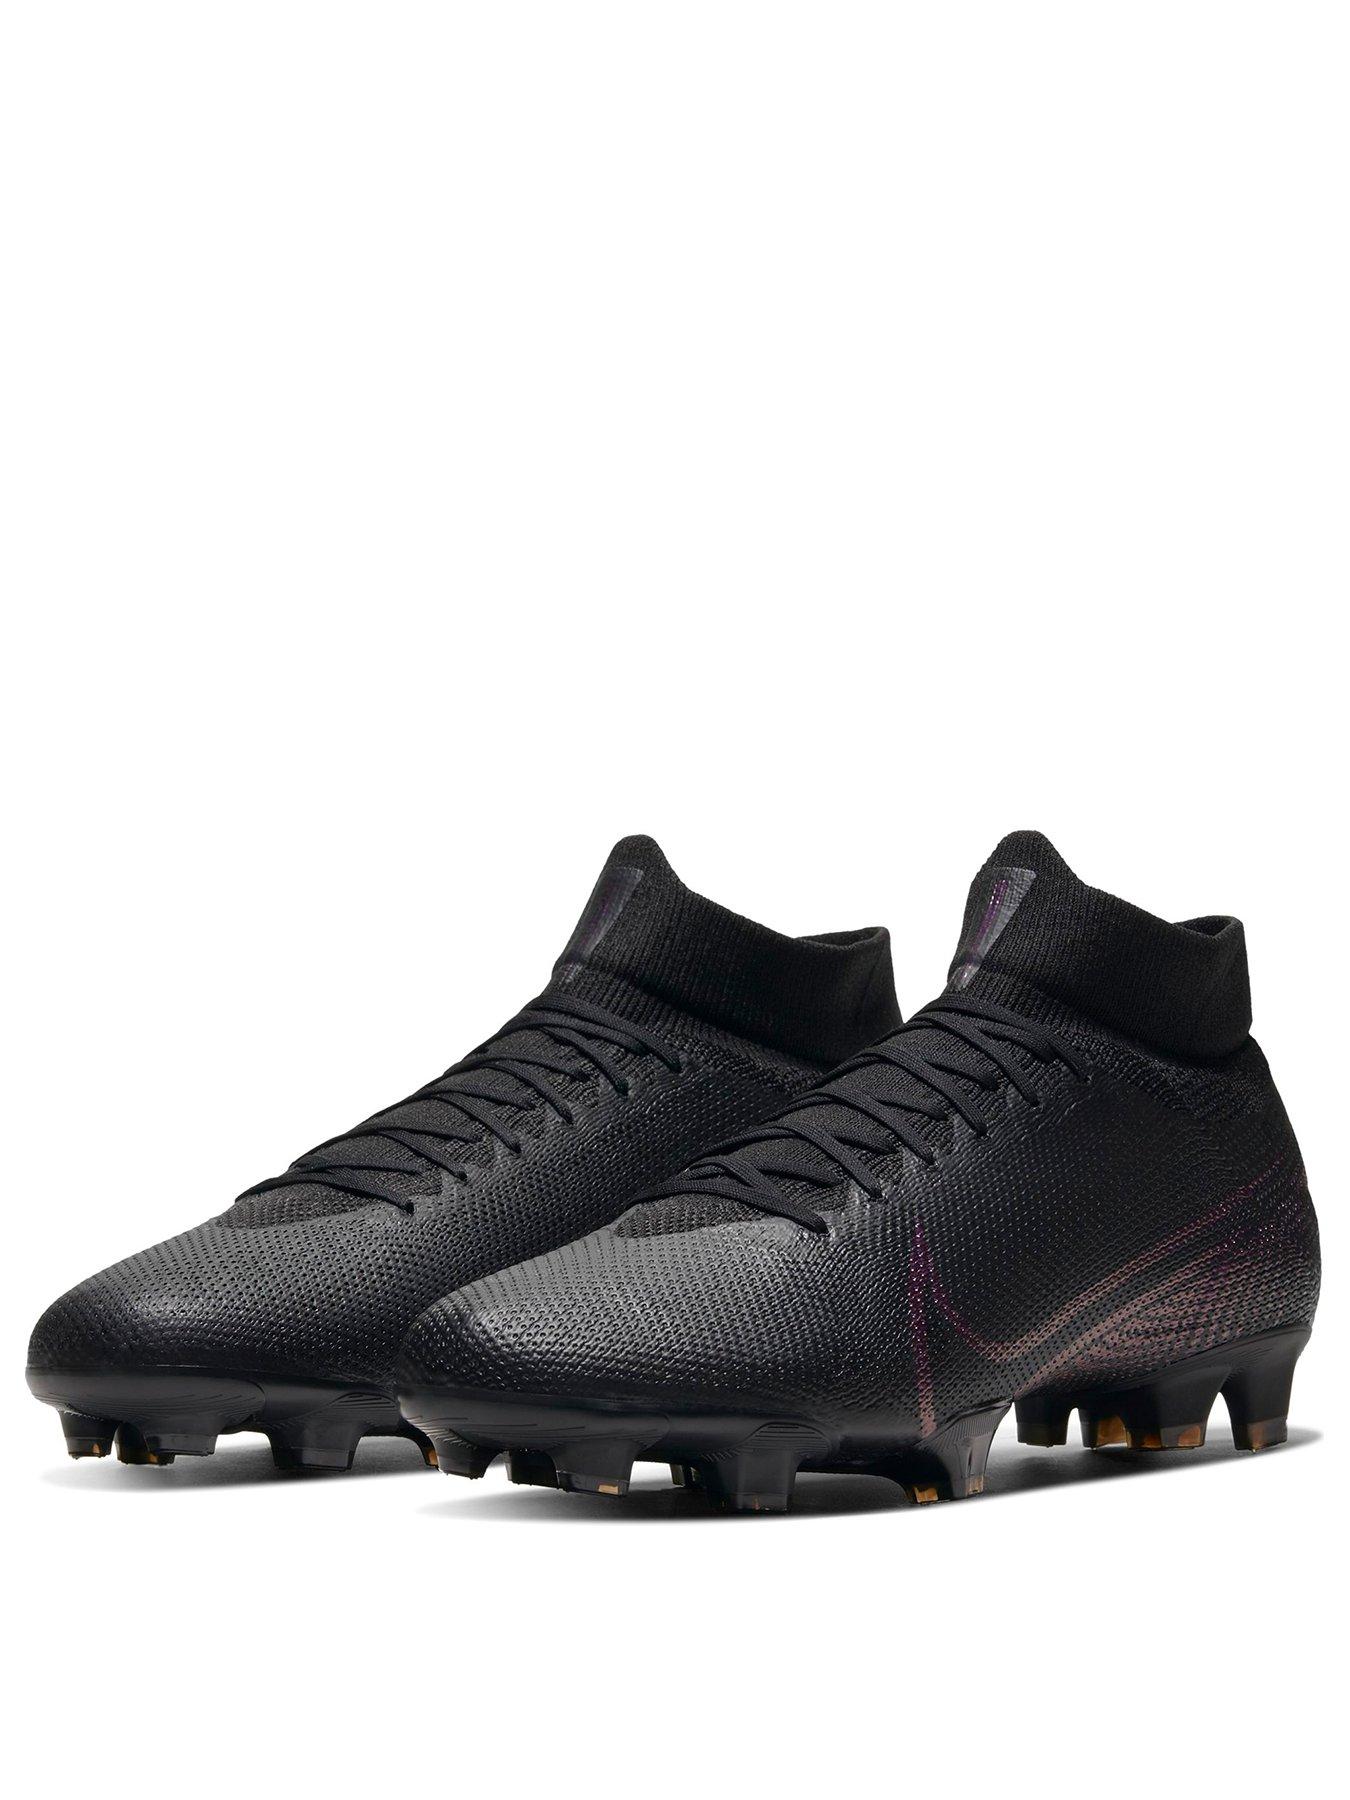 Nike Mercurial Superfly 6 Pro FG Soccer Cleat .com